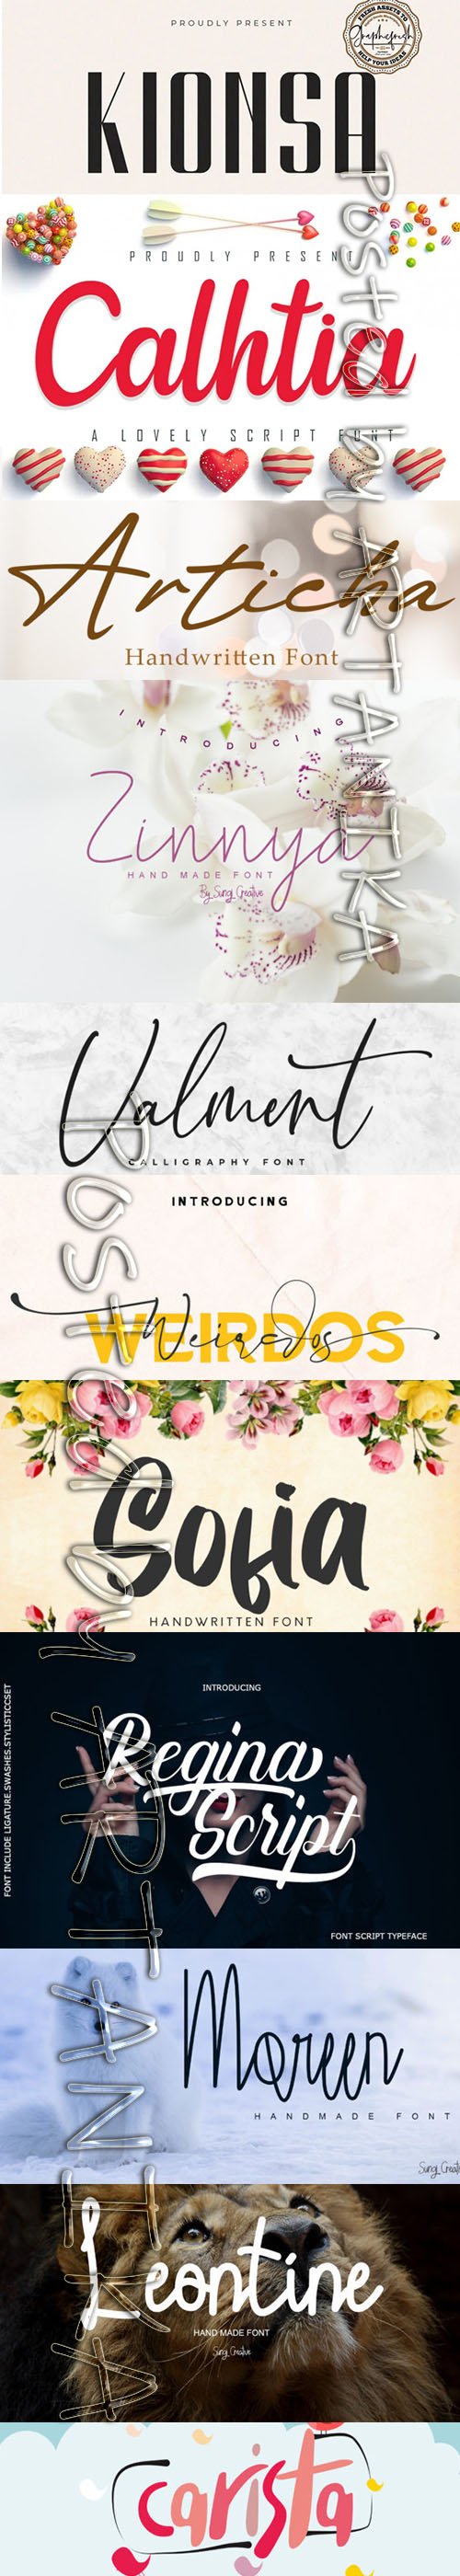 Collection of 11 Creative Fresh Fonts 2020 Vol 3